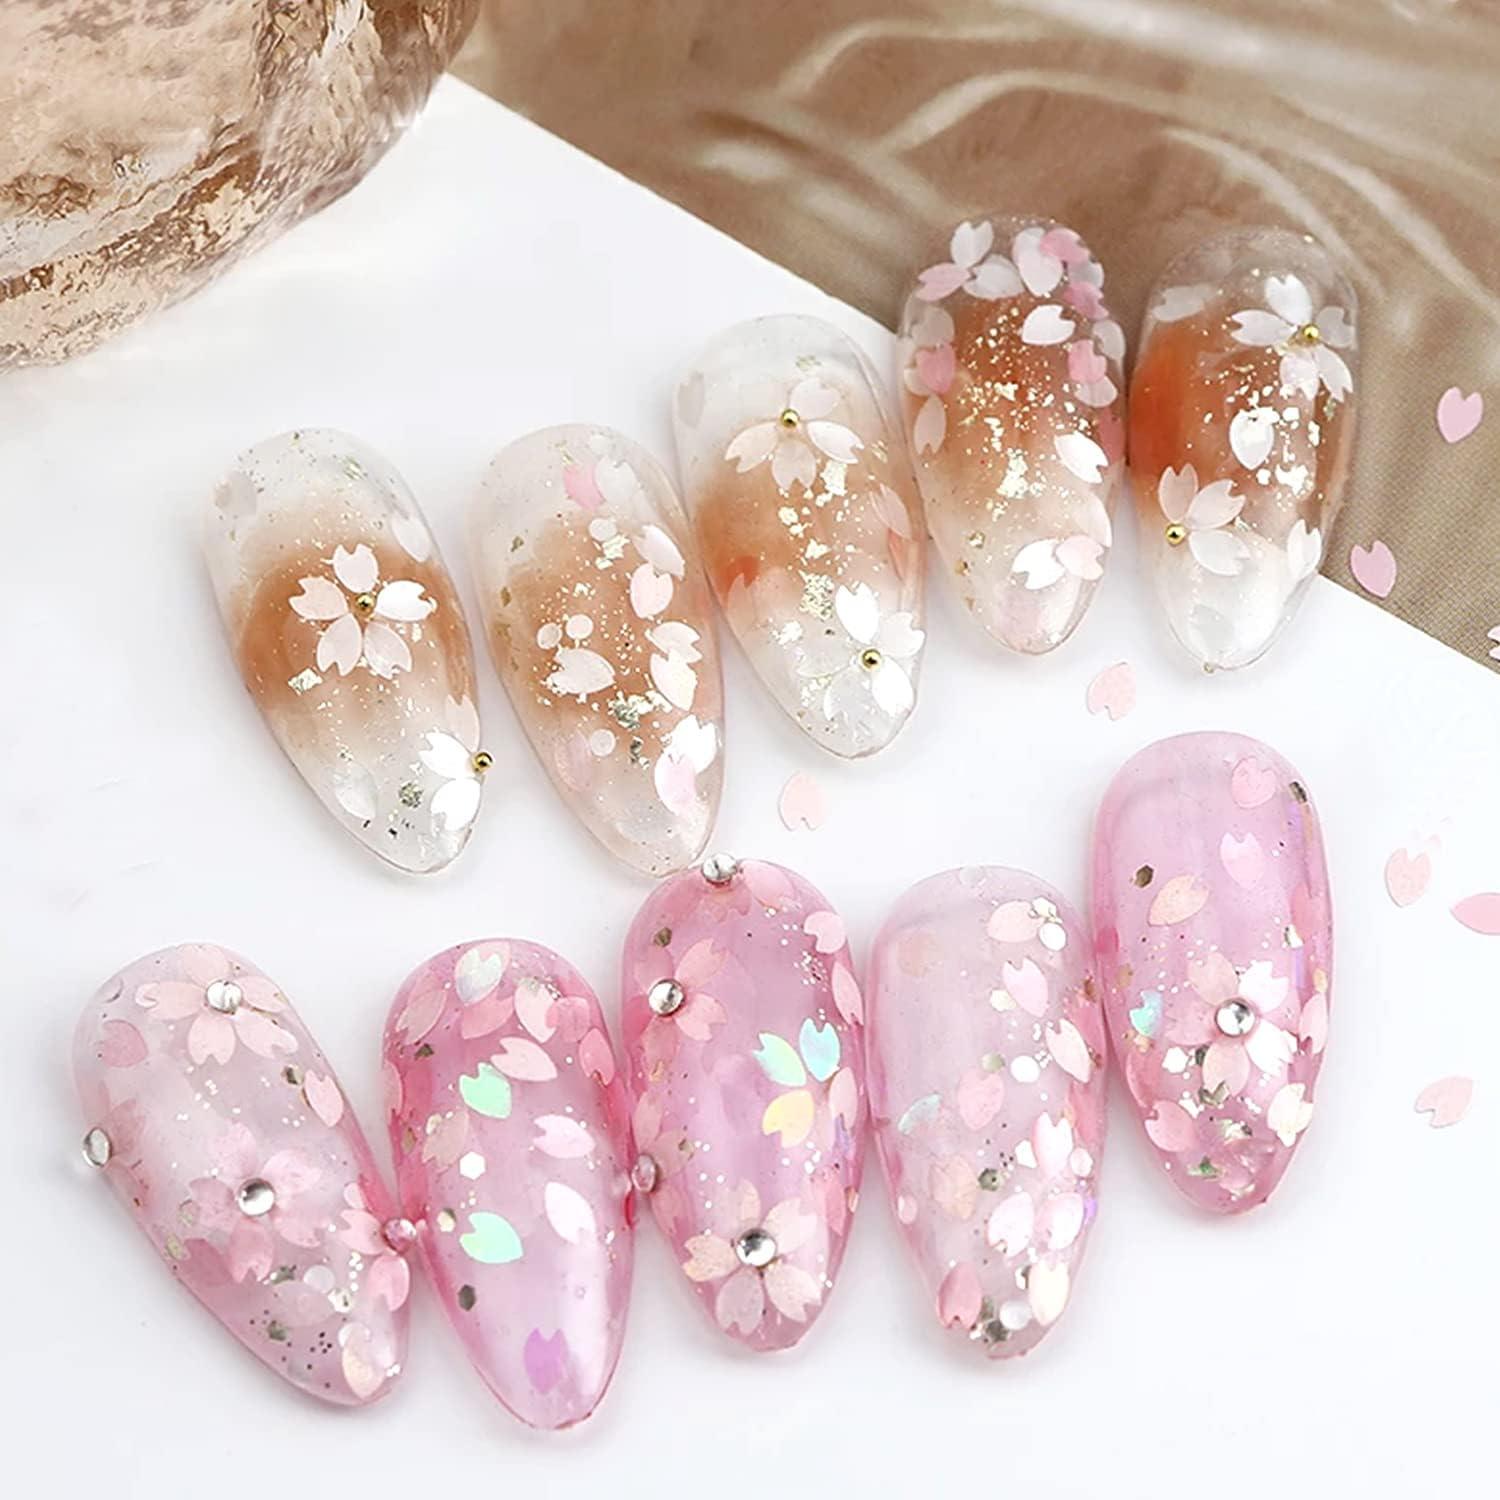 3d flower nail inspo | Acrylic nails, 3d flower nails, Square acrylic nails